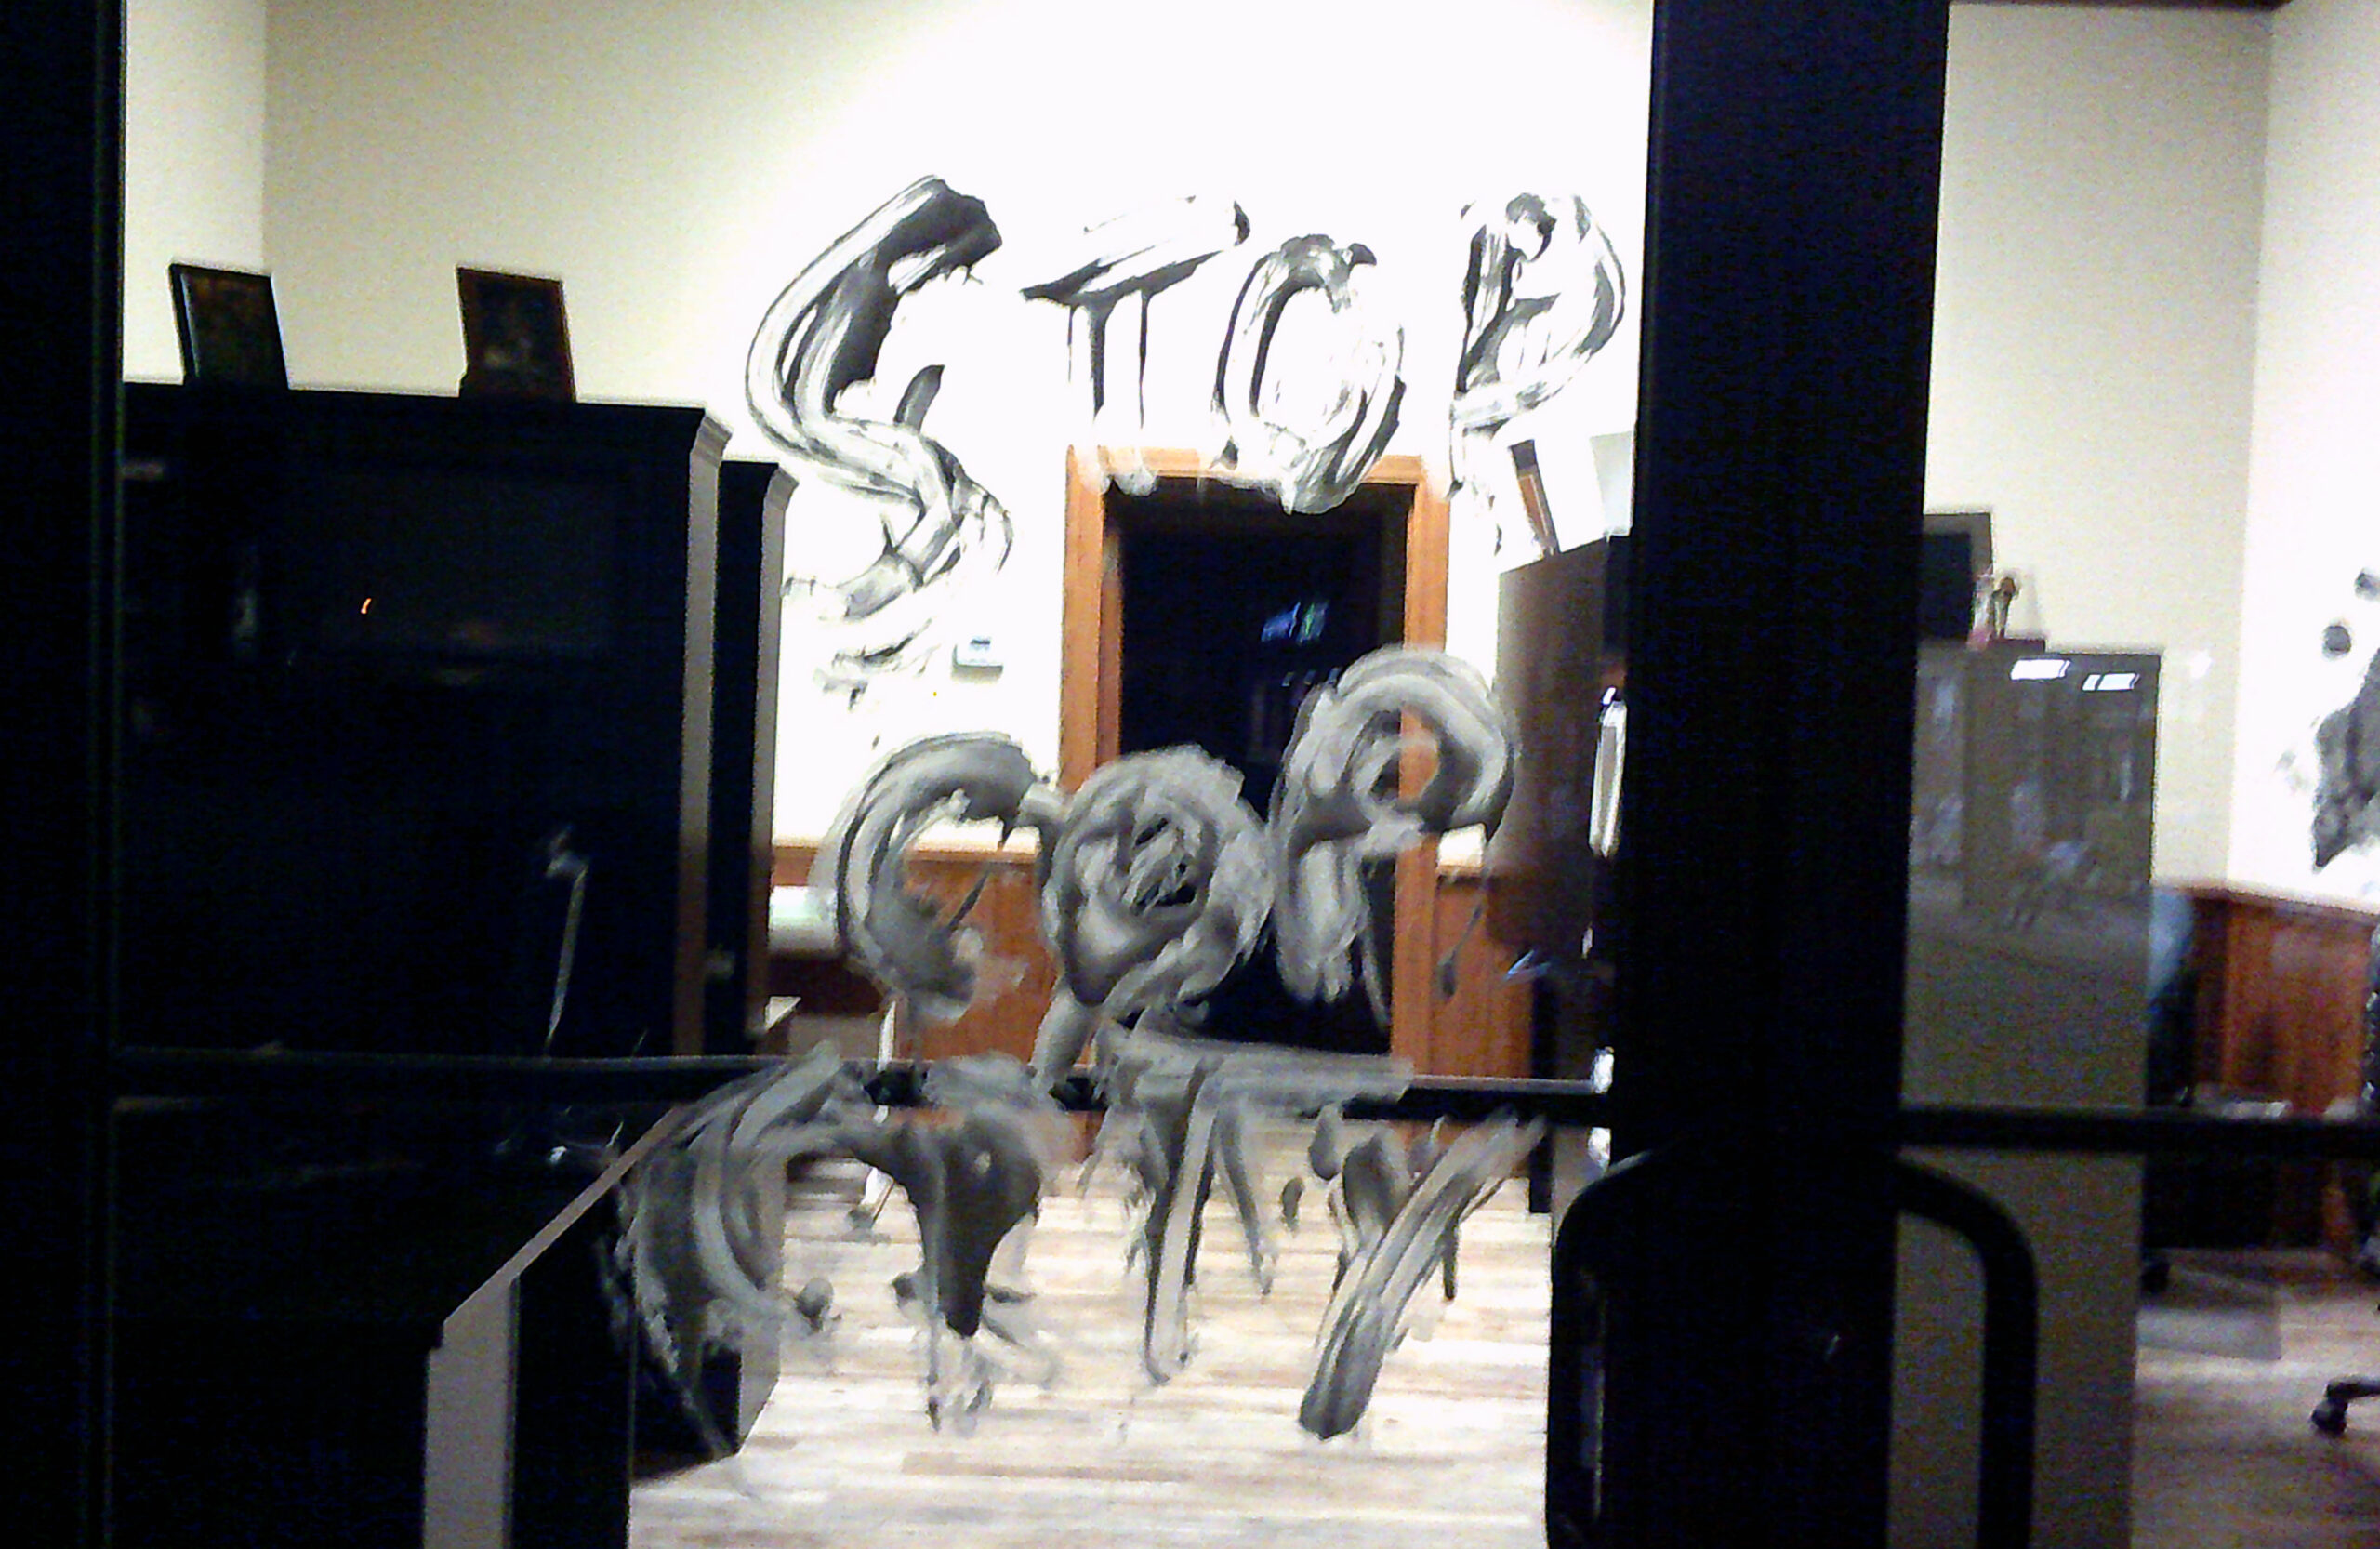 "STOP COP CITY" is painted in white over a window.